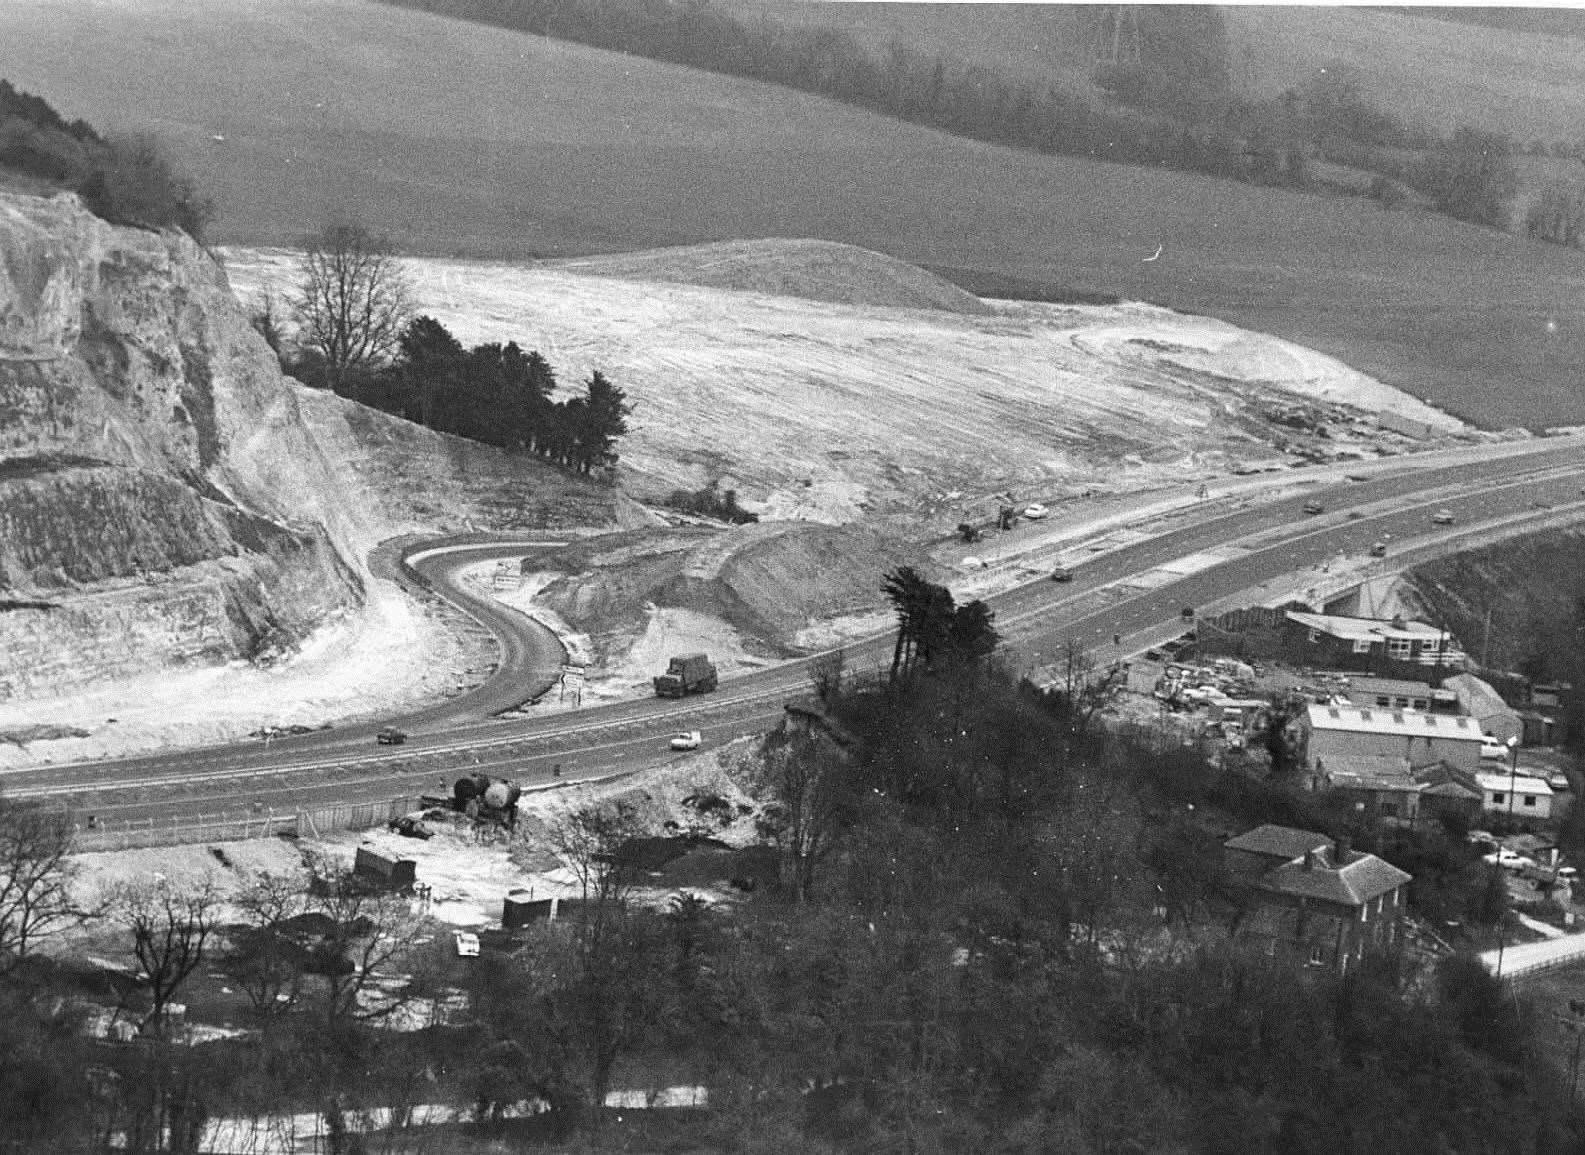 Construction work at Blue Bell Hill in 1972